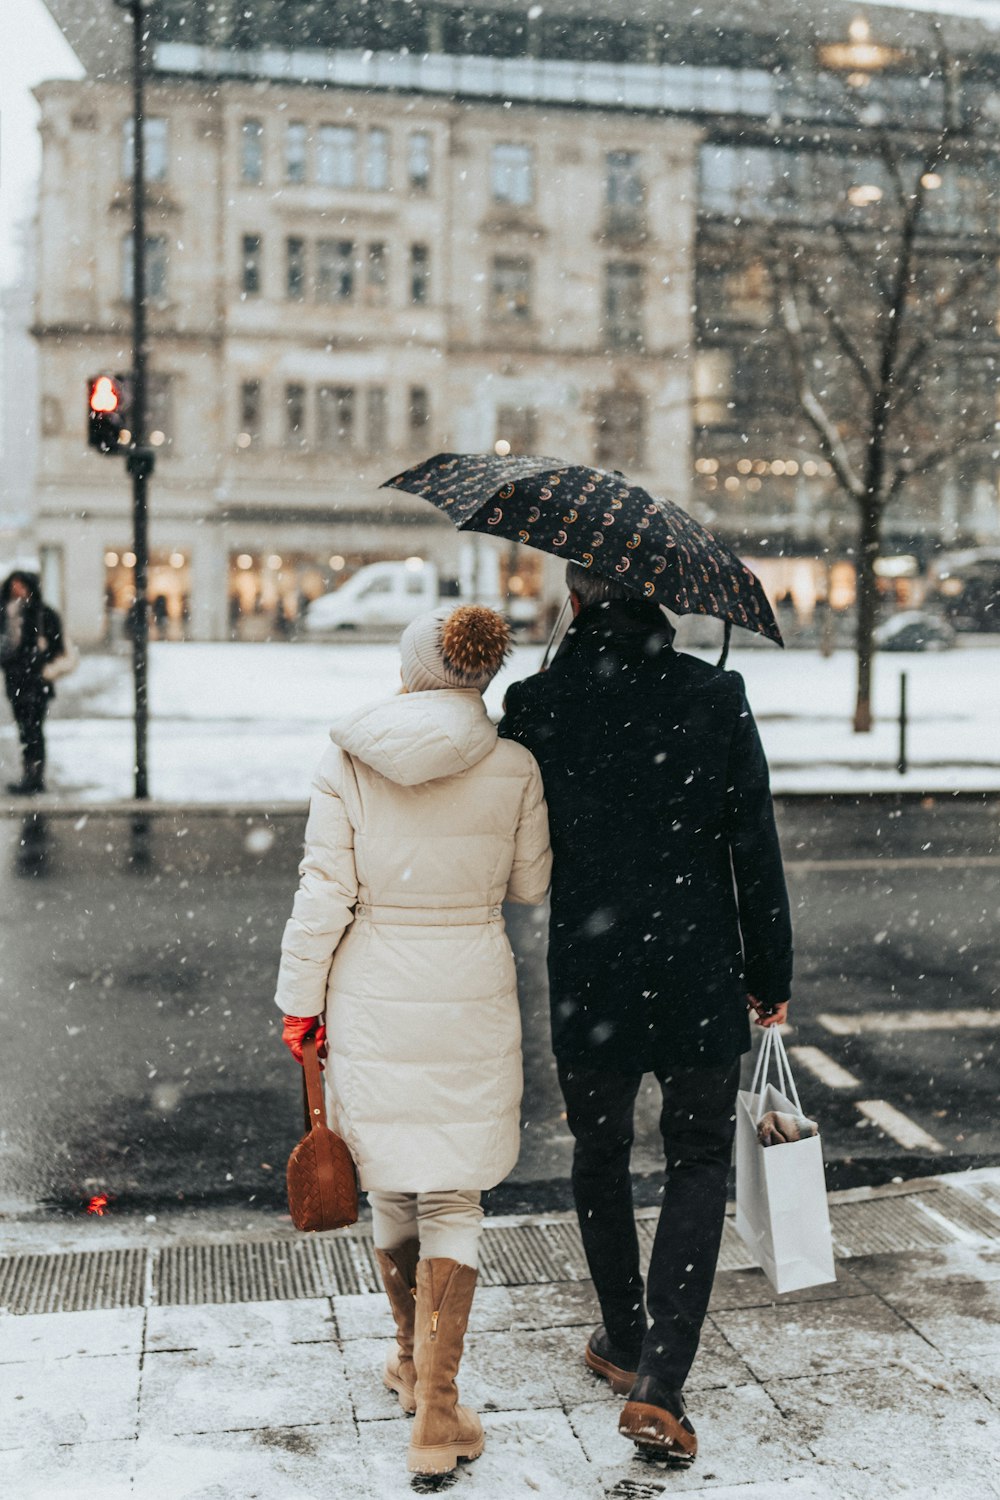 a man and woman walking down the street in the snow